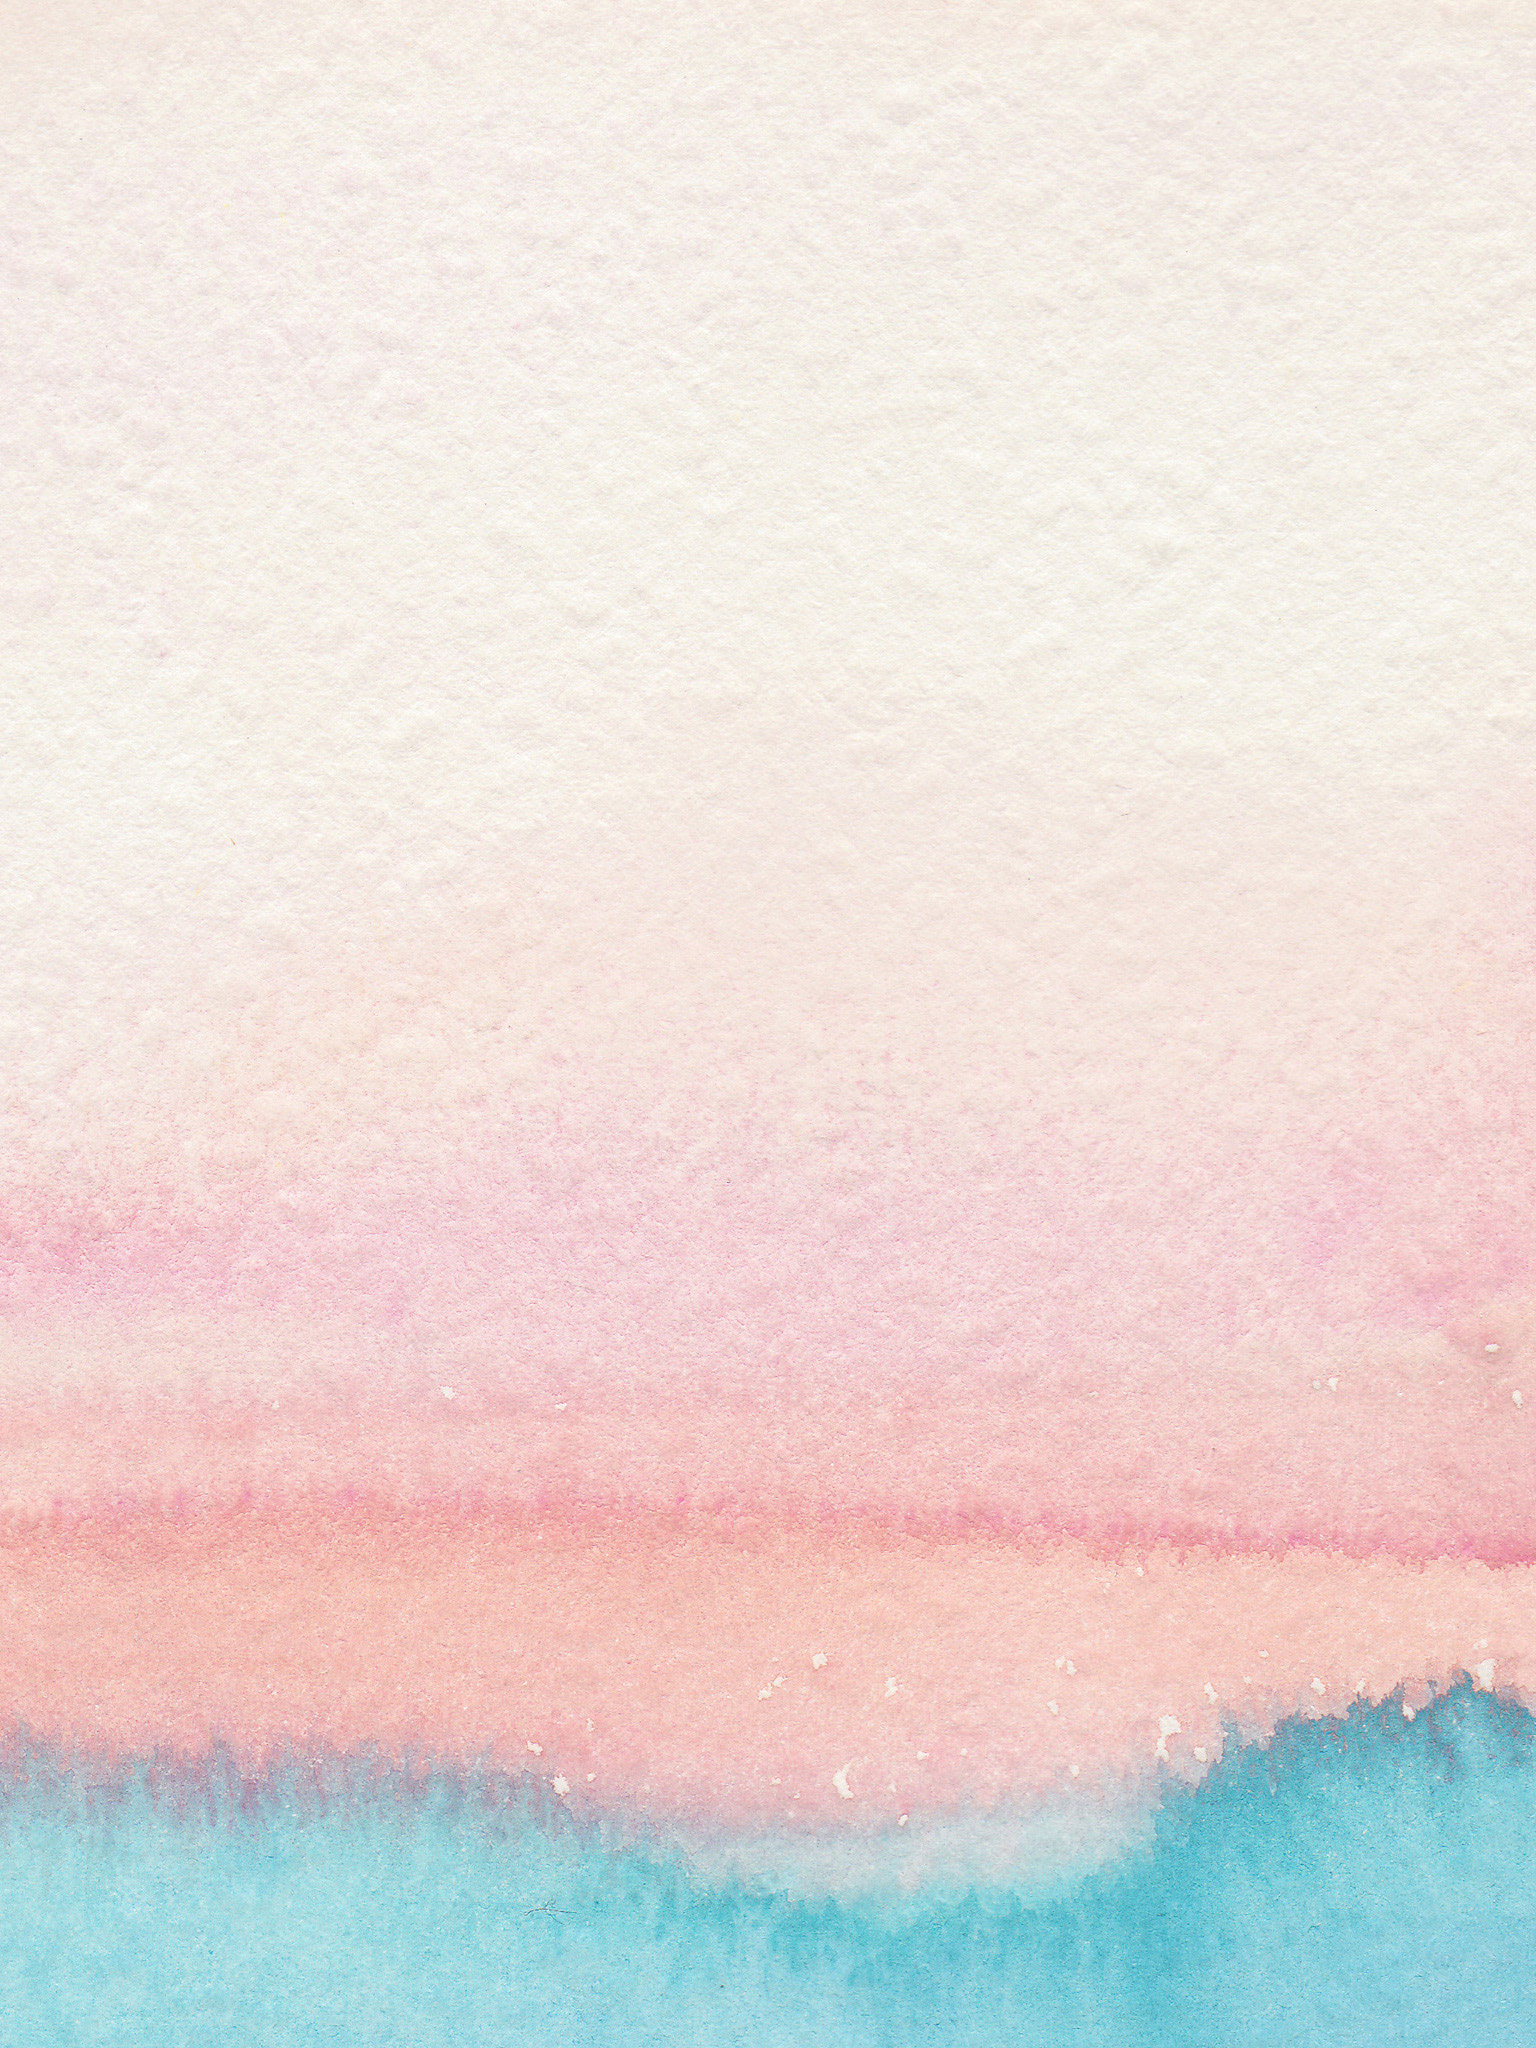 watercolor wallpaper,pink,blue,turquoise,sky,watercolor paint